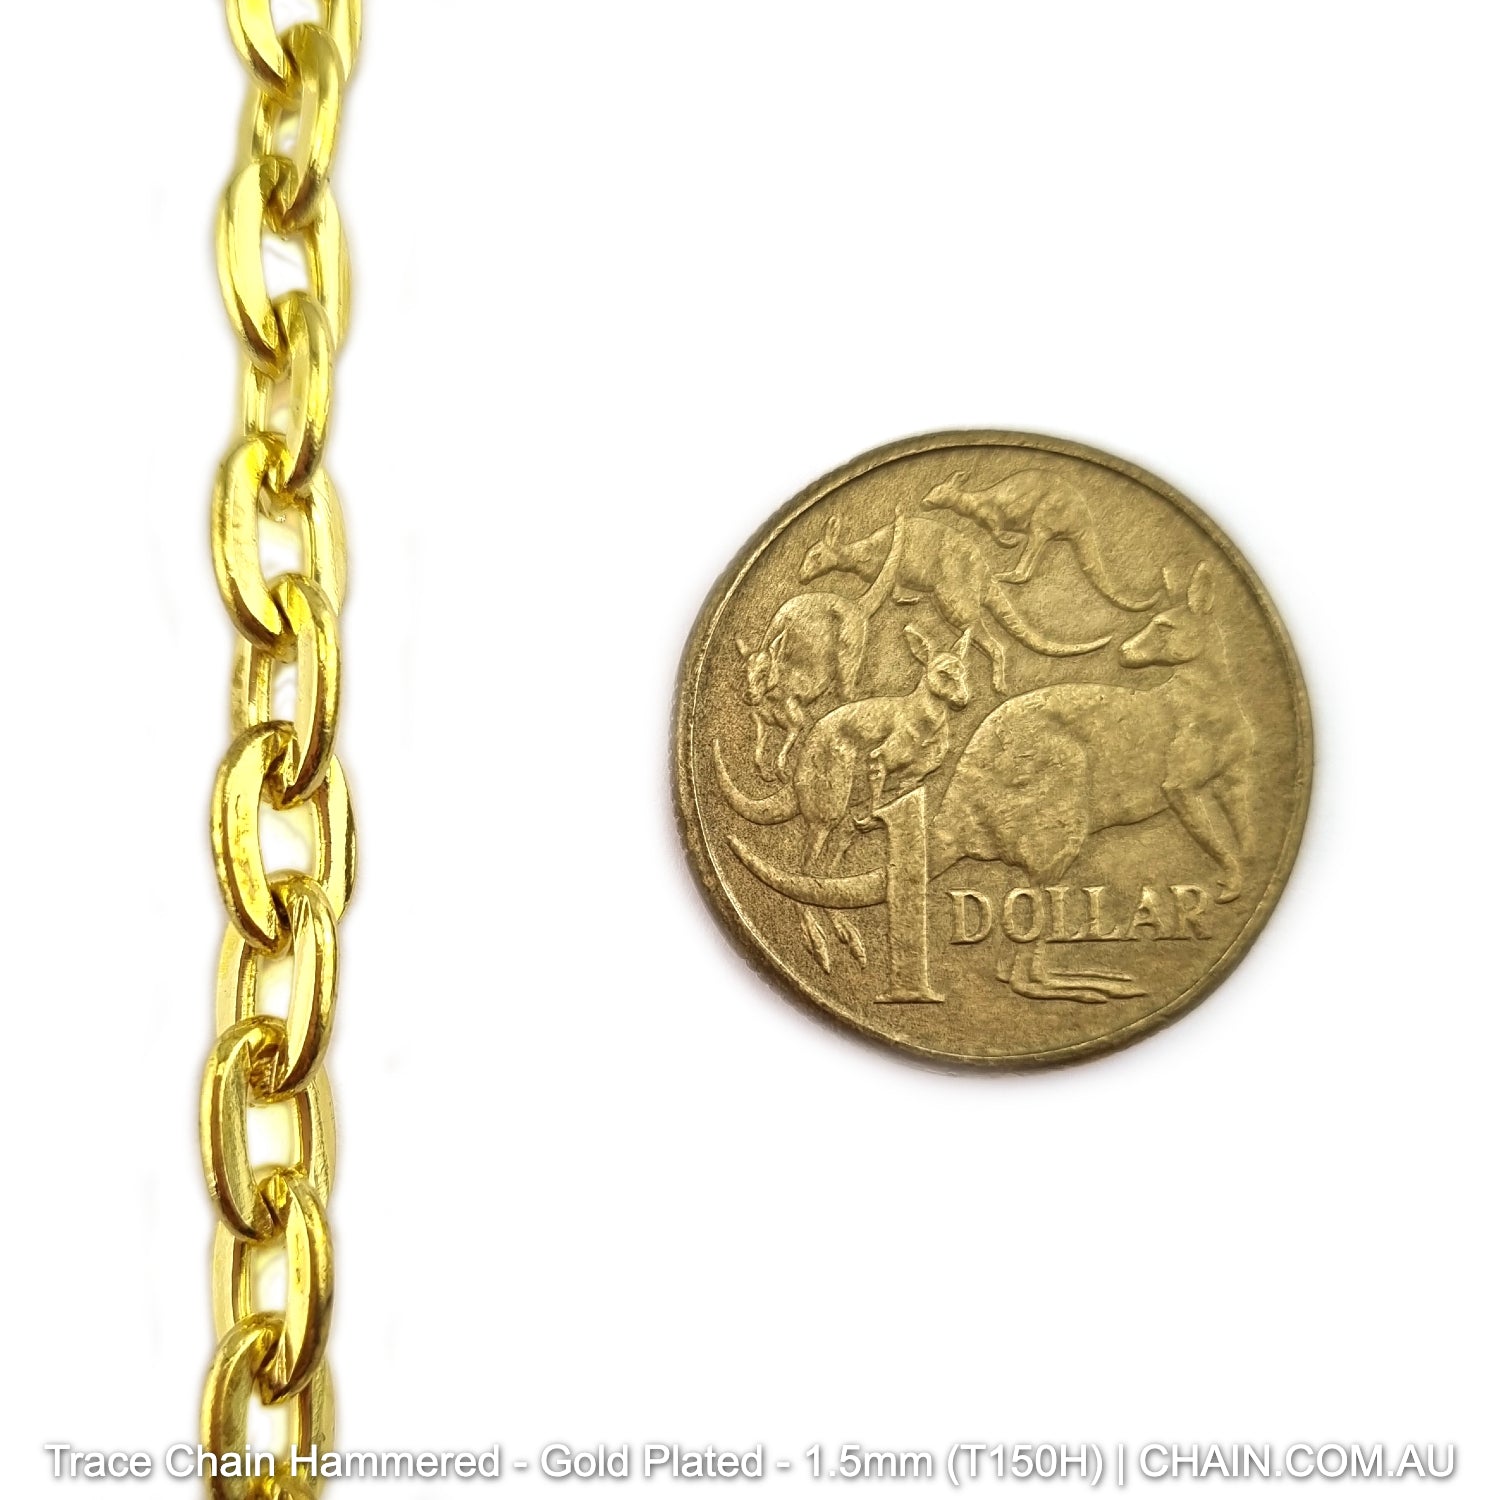 Hammered Trace Chain in a Gold Plated Finish. Size: 1.5mm, T150H. Jewellery Chain, Australia wide shipping. Shop chain.com.au